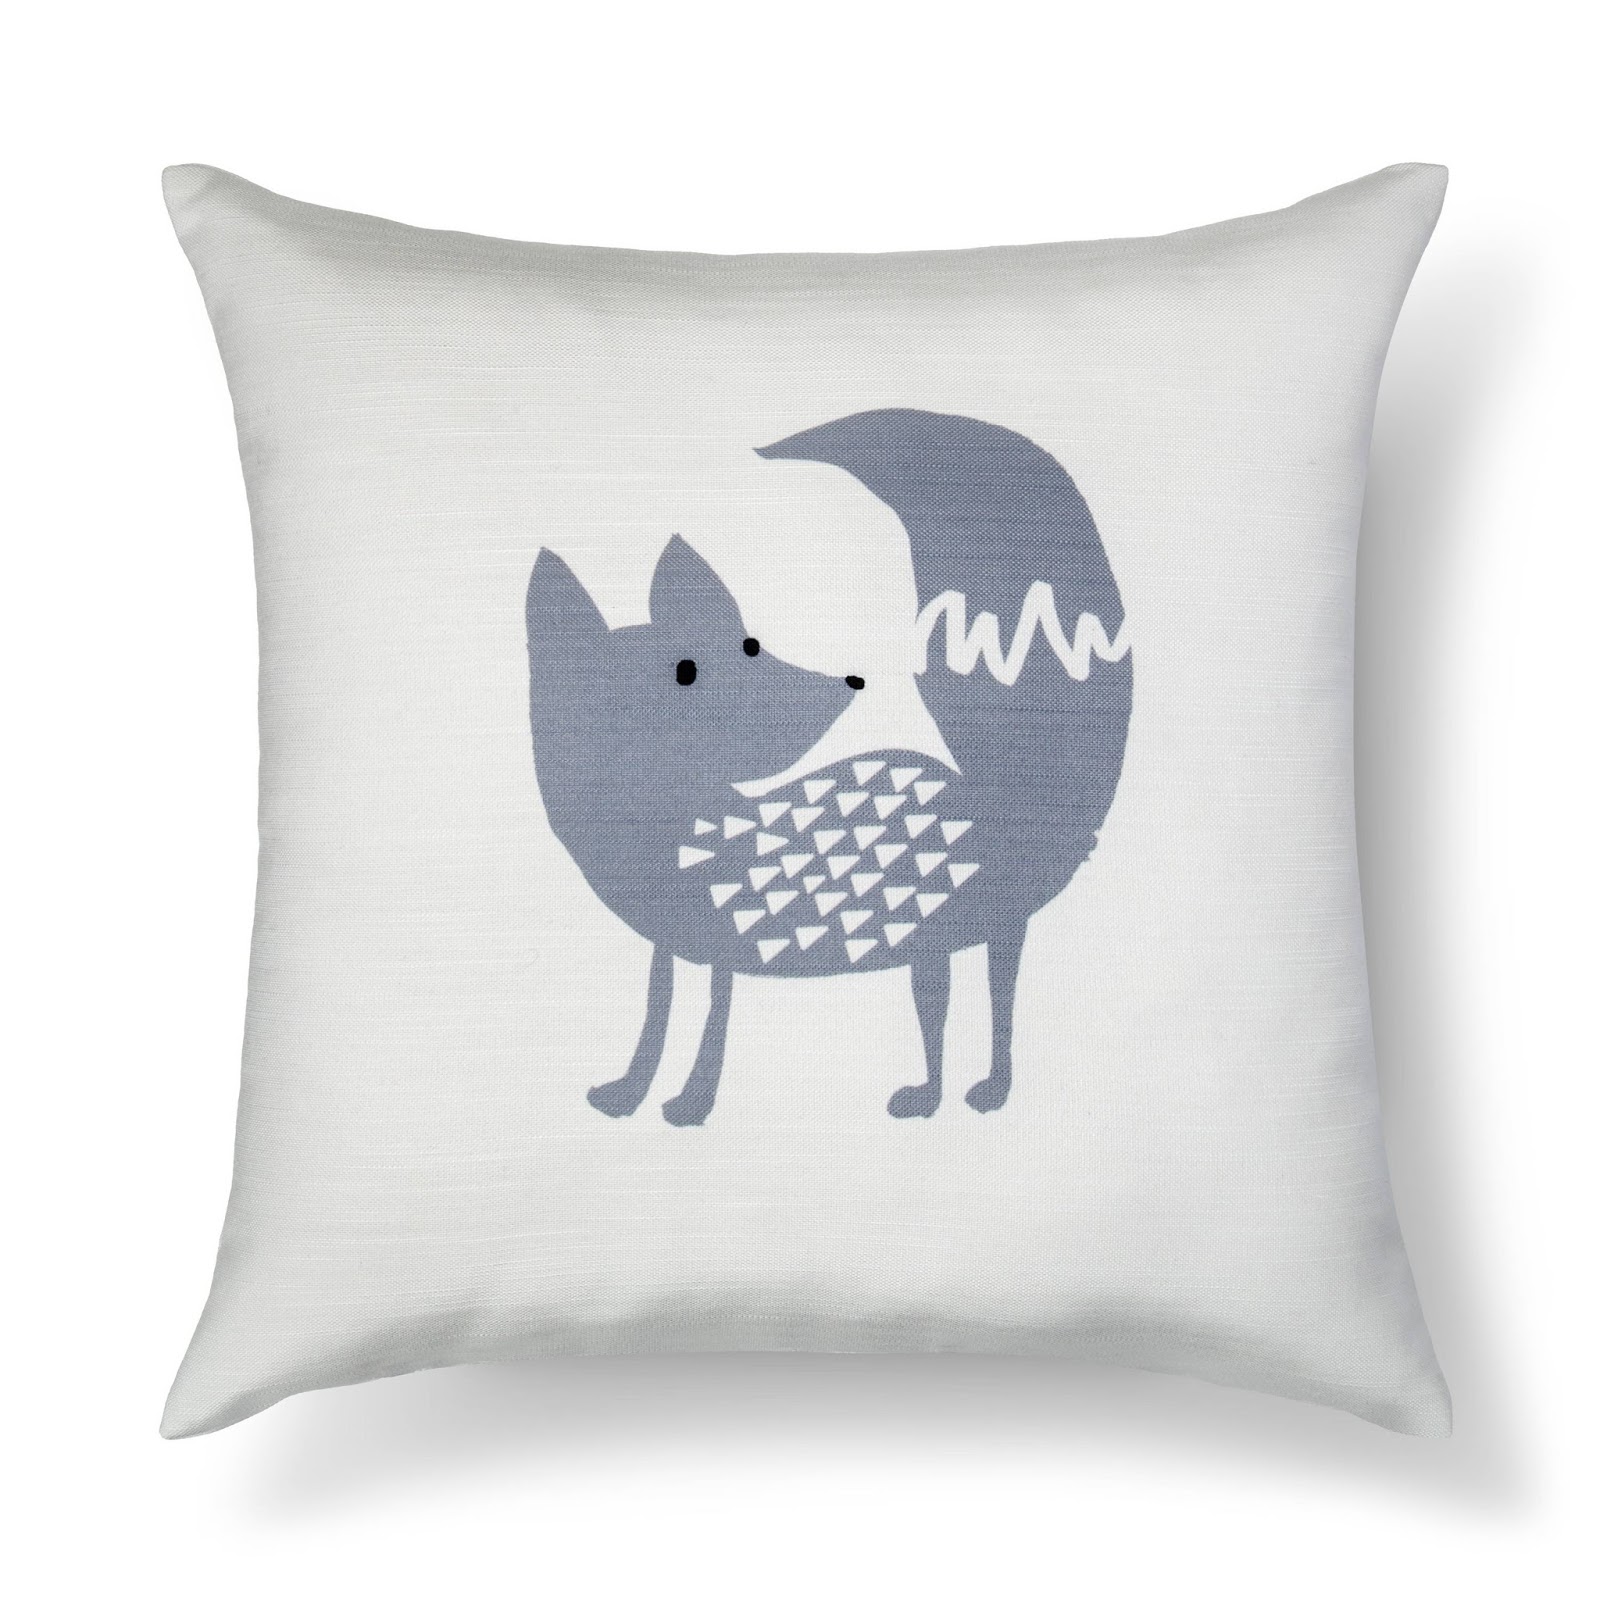 Can you help me find this adorable pillow for my new apartment?